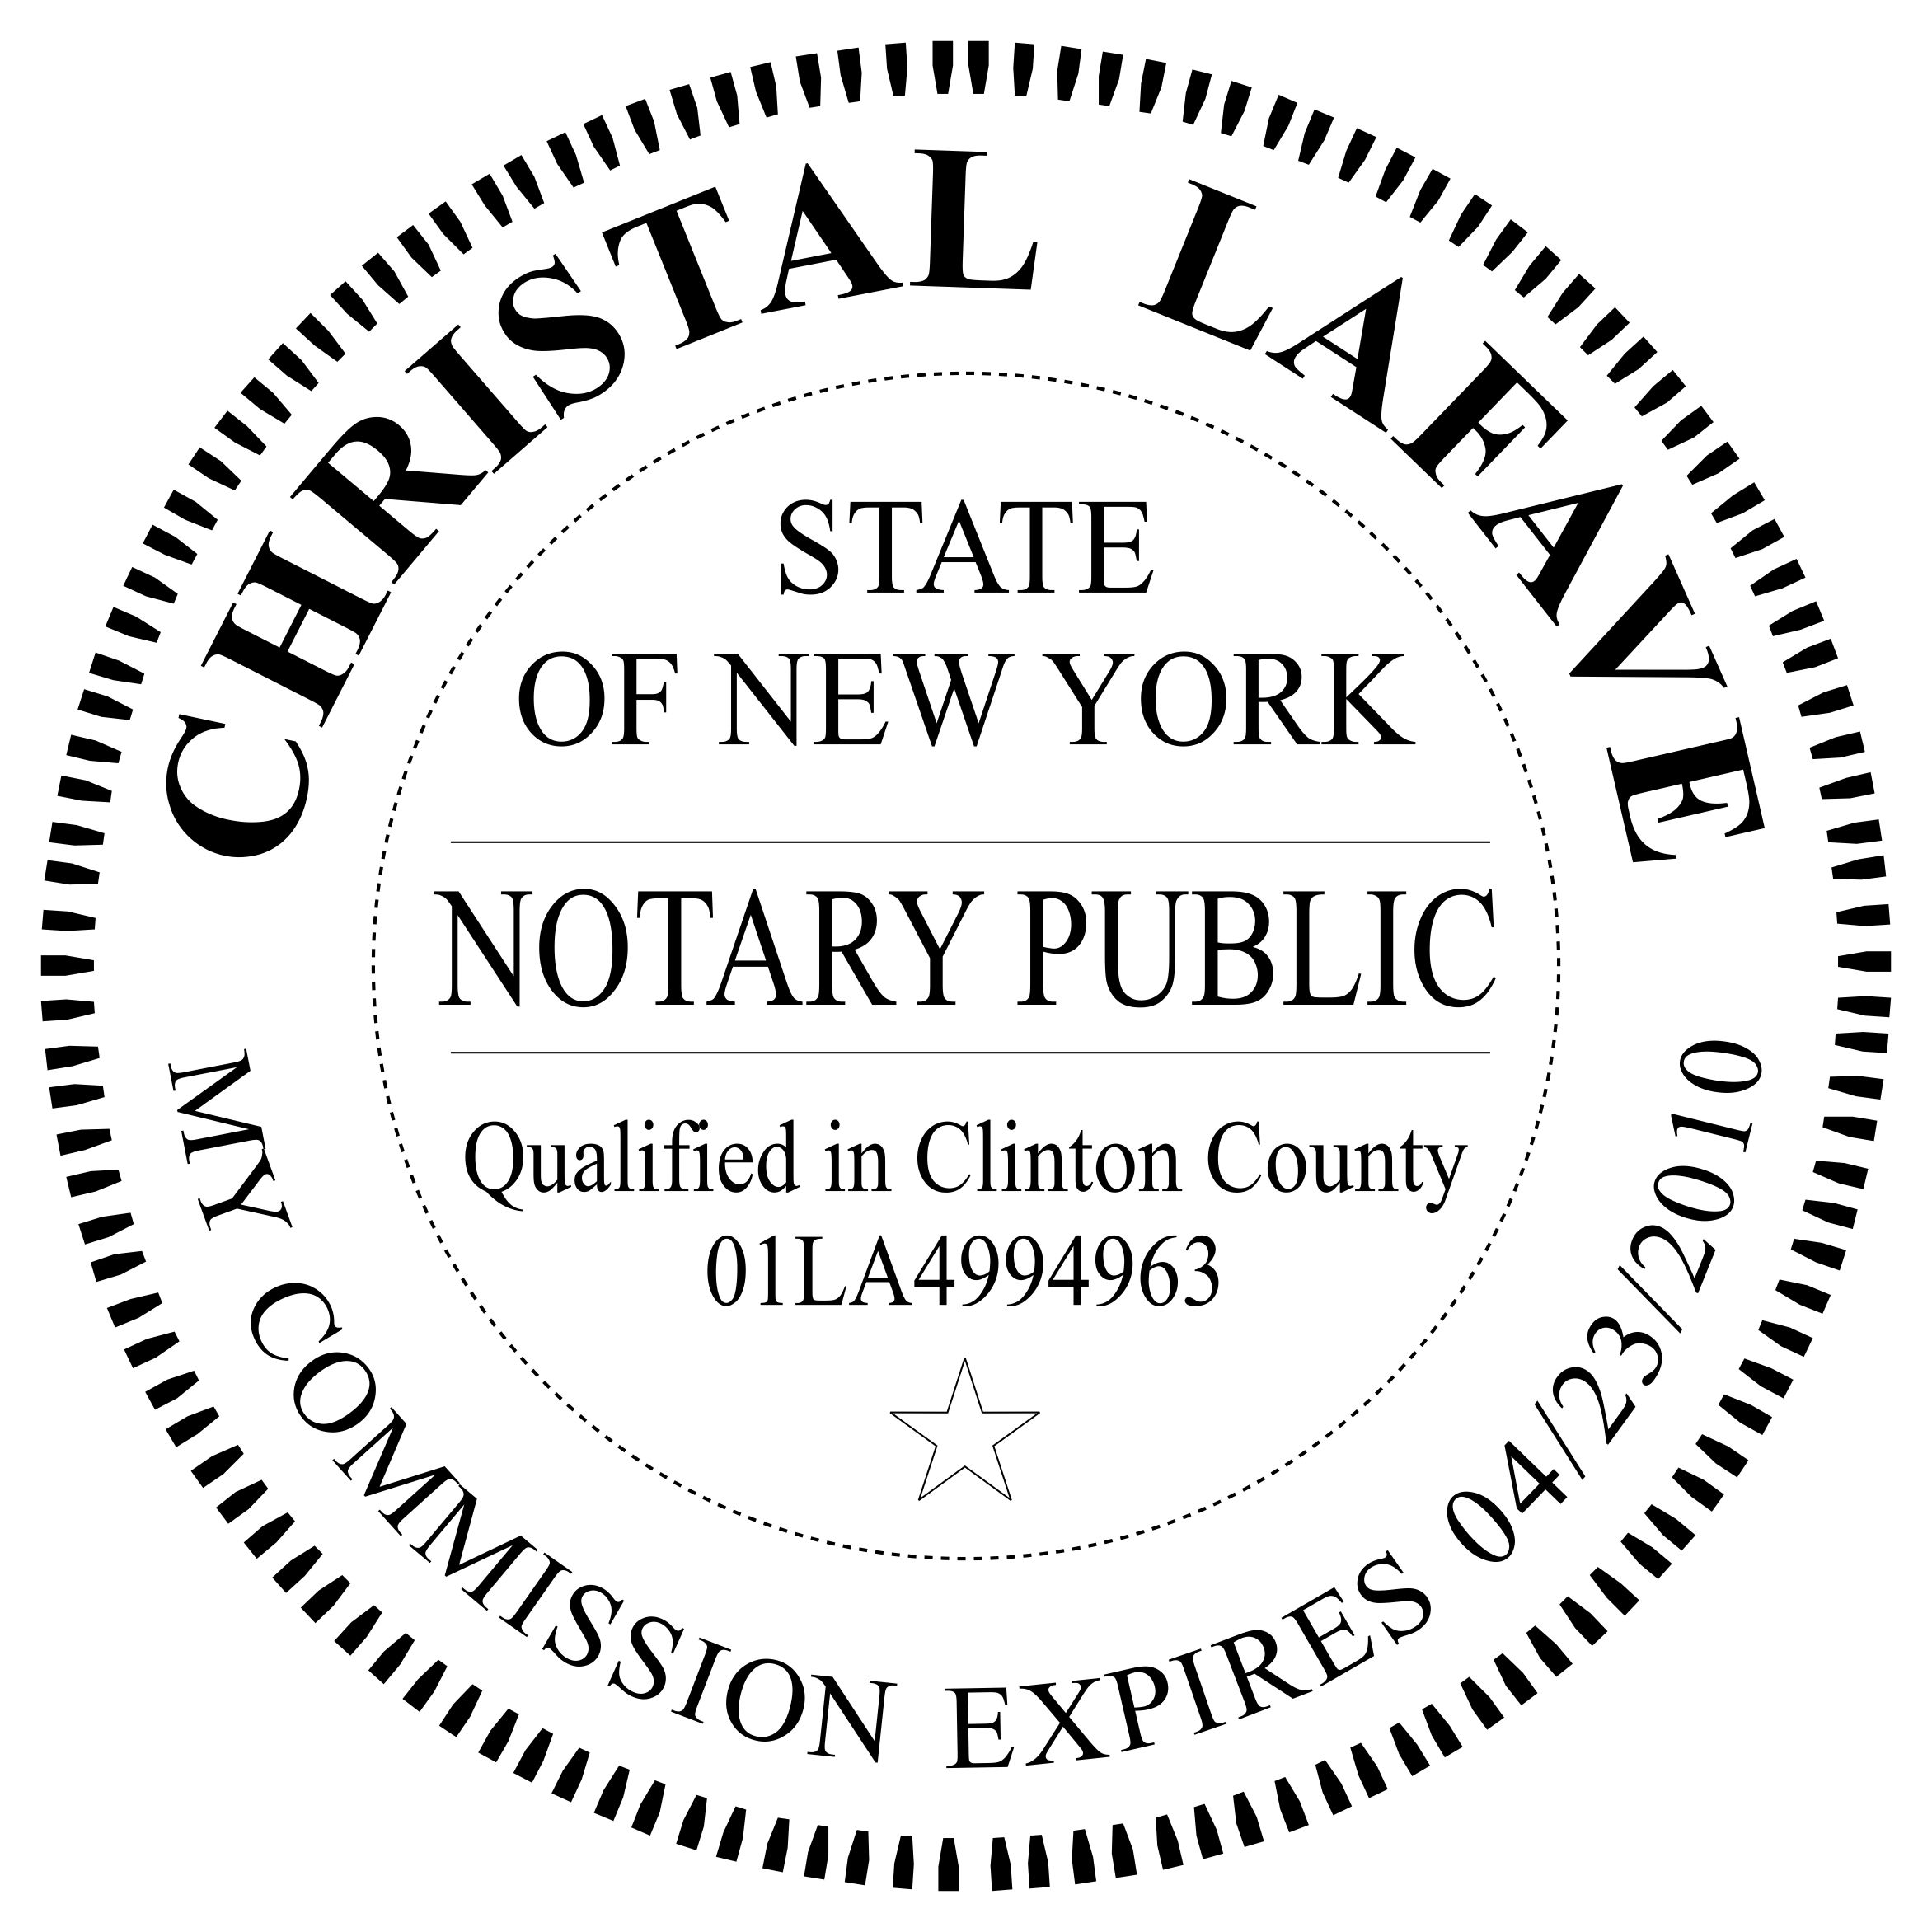 NY Notary2 - Everything a Business Owner Needs to Know About Corporate Seals